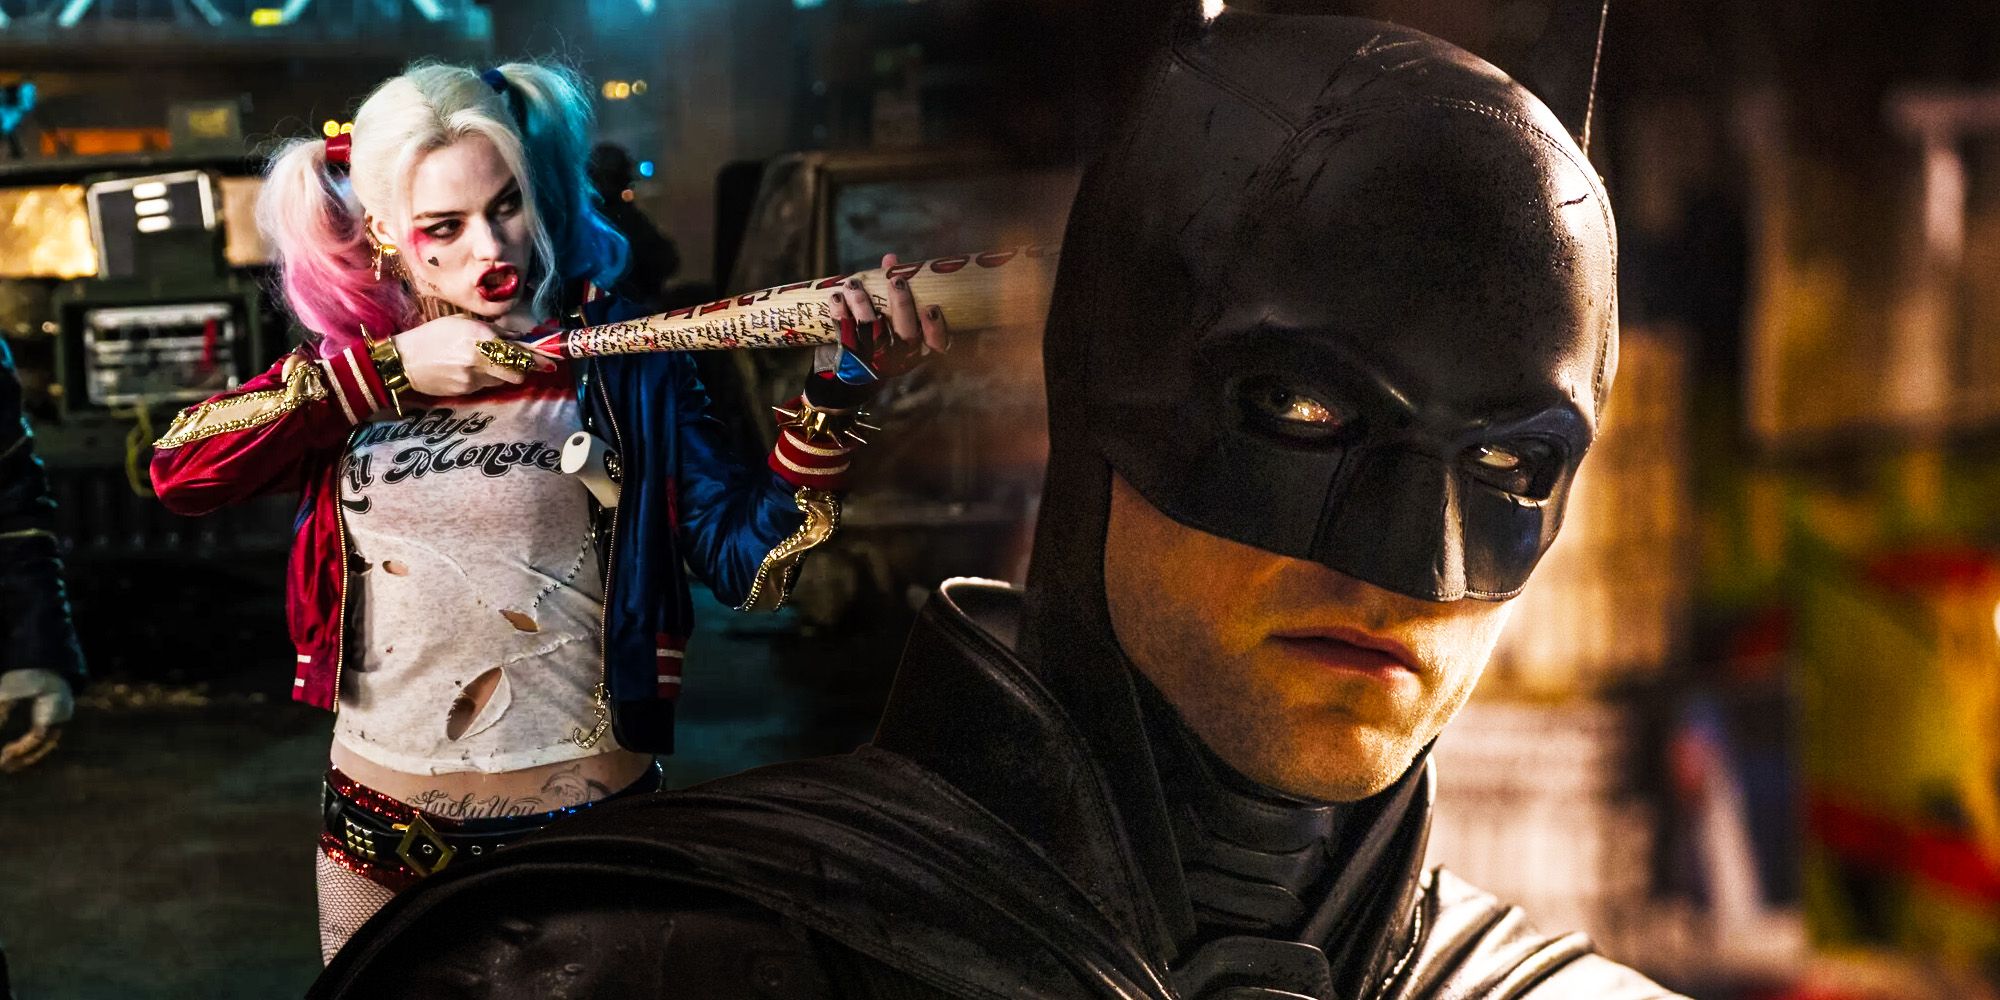 The Batman 2 Can Make DC Movie History With A Harley Quinn Role